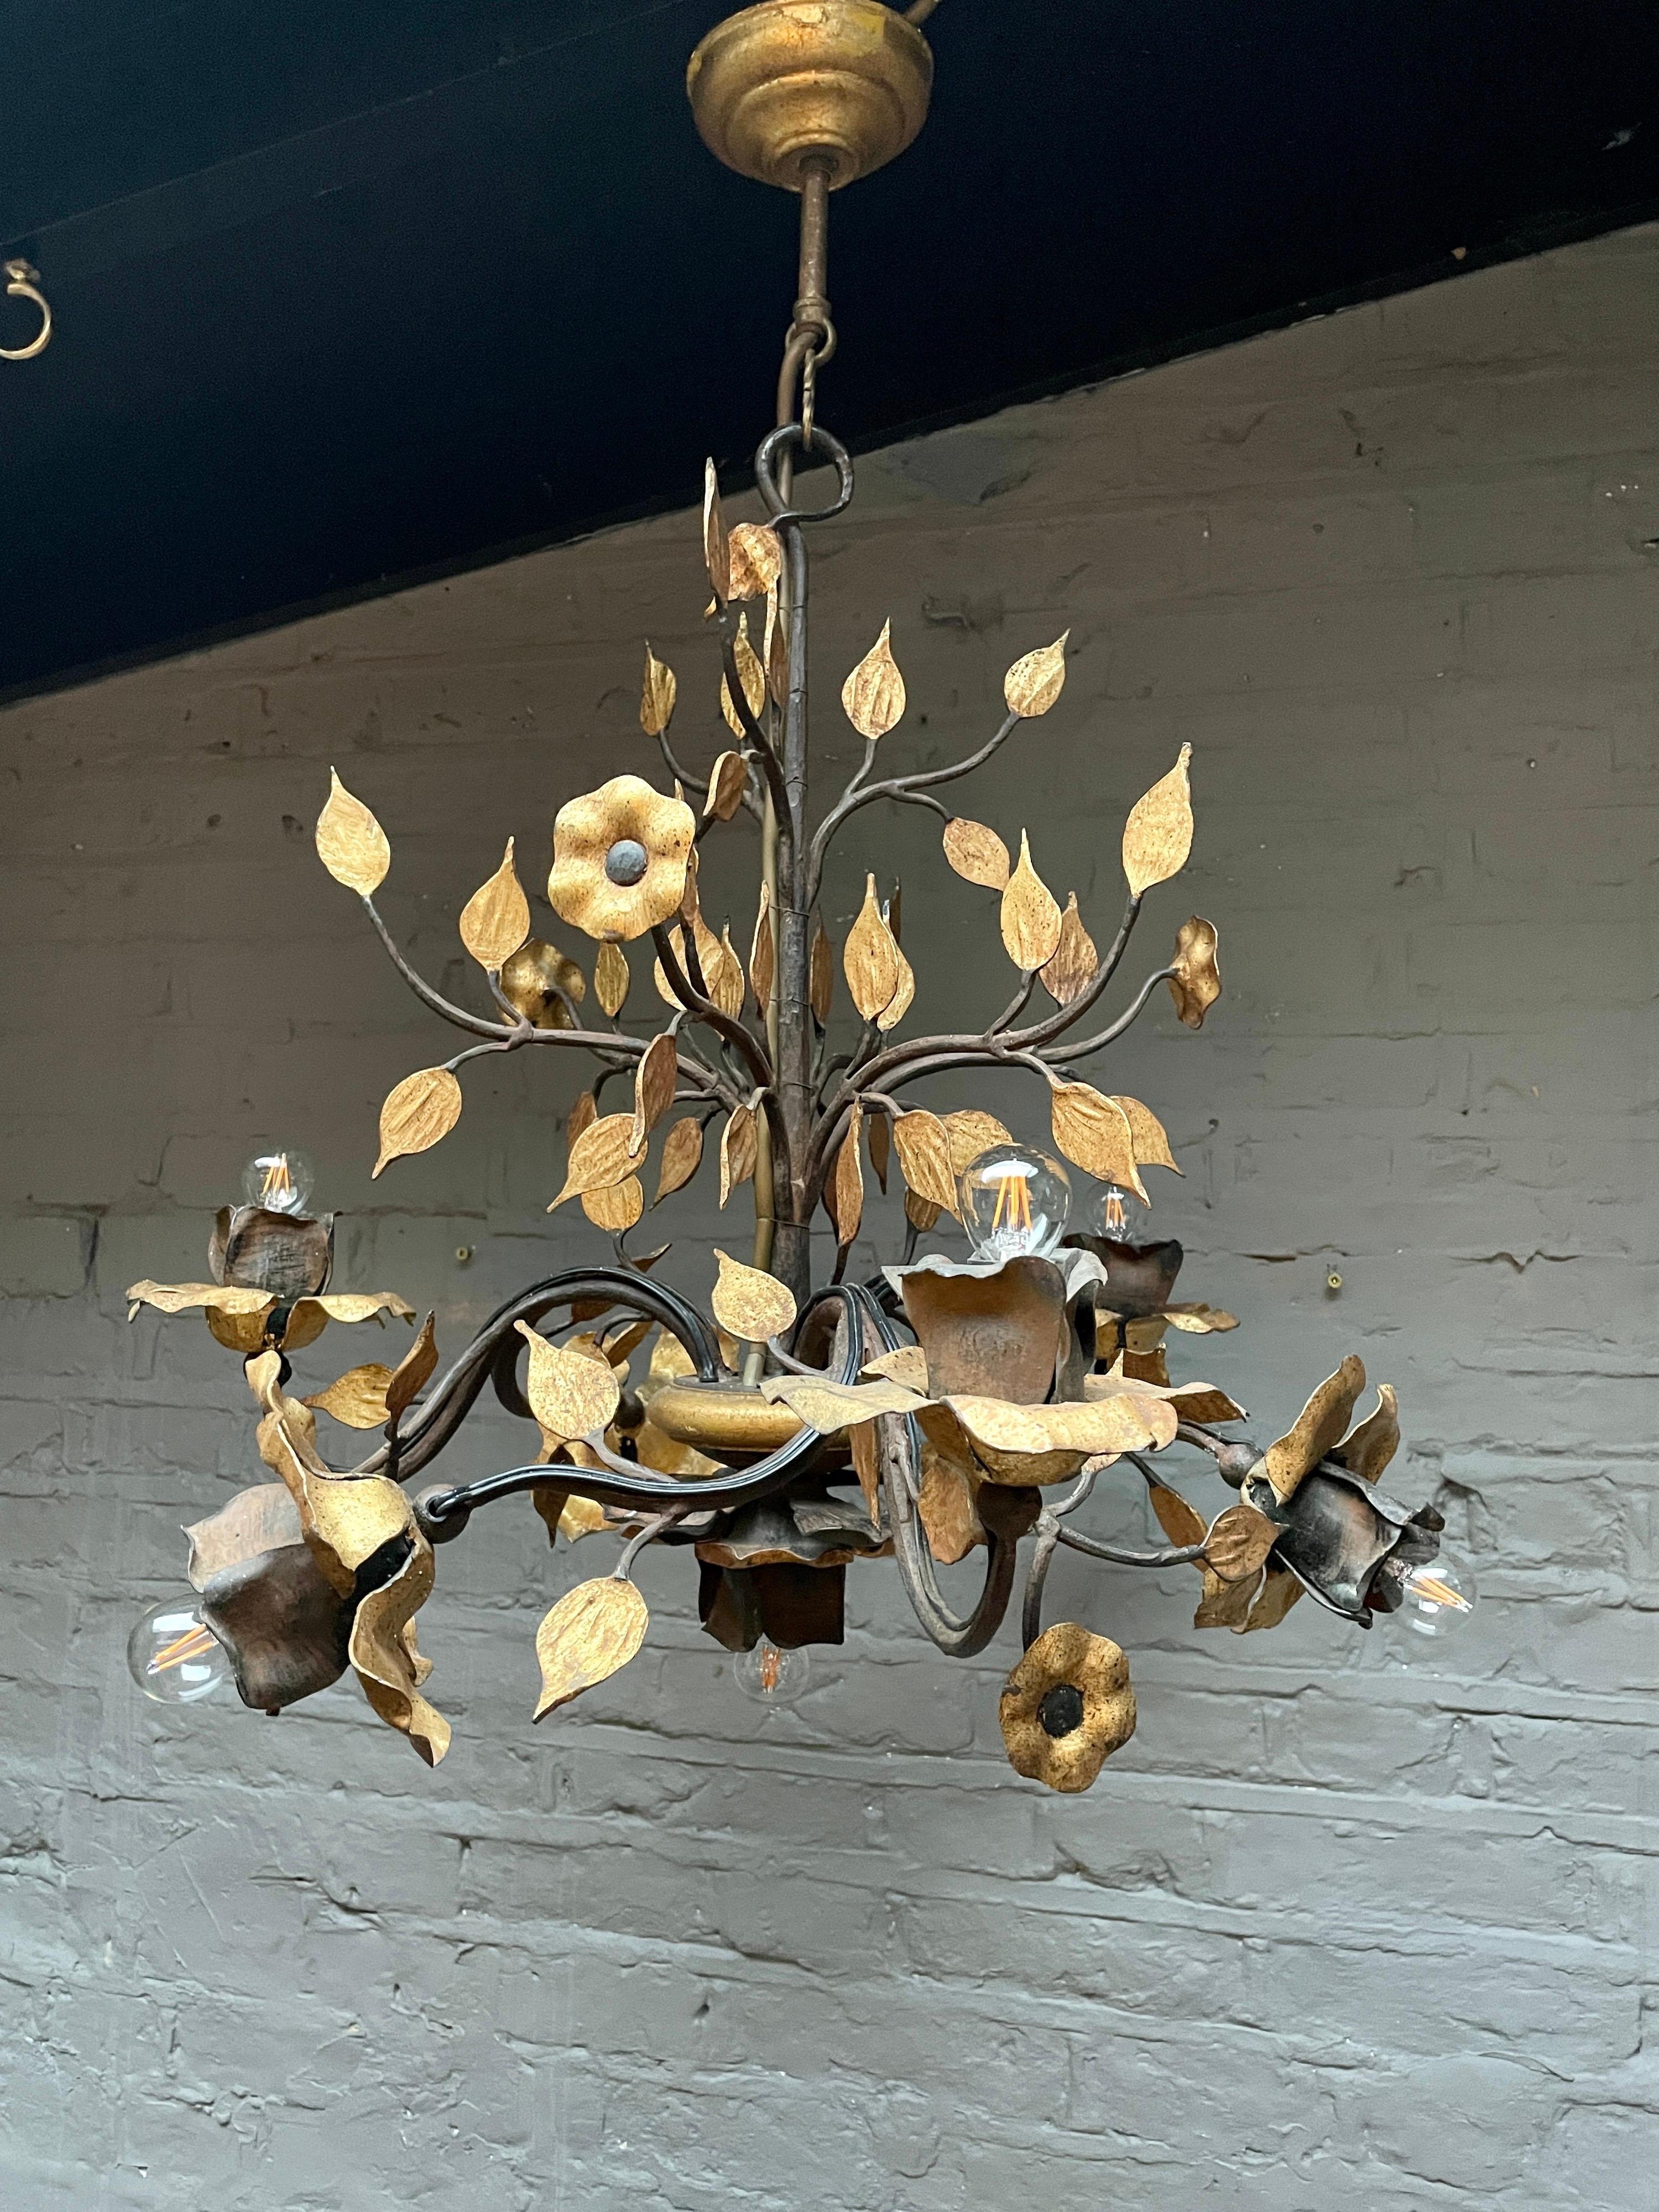 A wrought iron chandelier in black finish with gold gilt accents in an organic, floral and foliate design. Very well executed, finished with delicate gilding and details. The chandelier has 6 branches decorated with foliage and flowers, the bulb